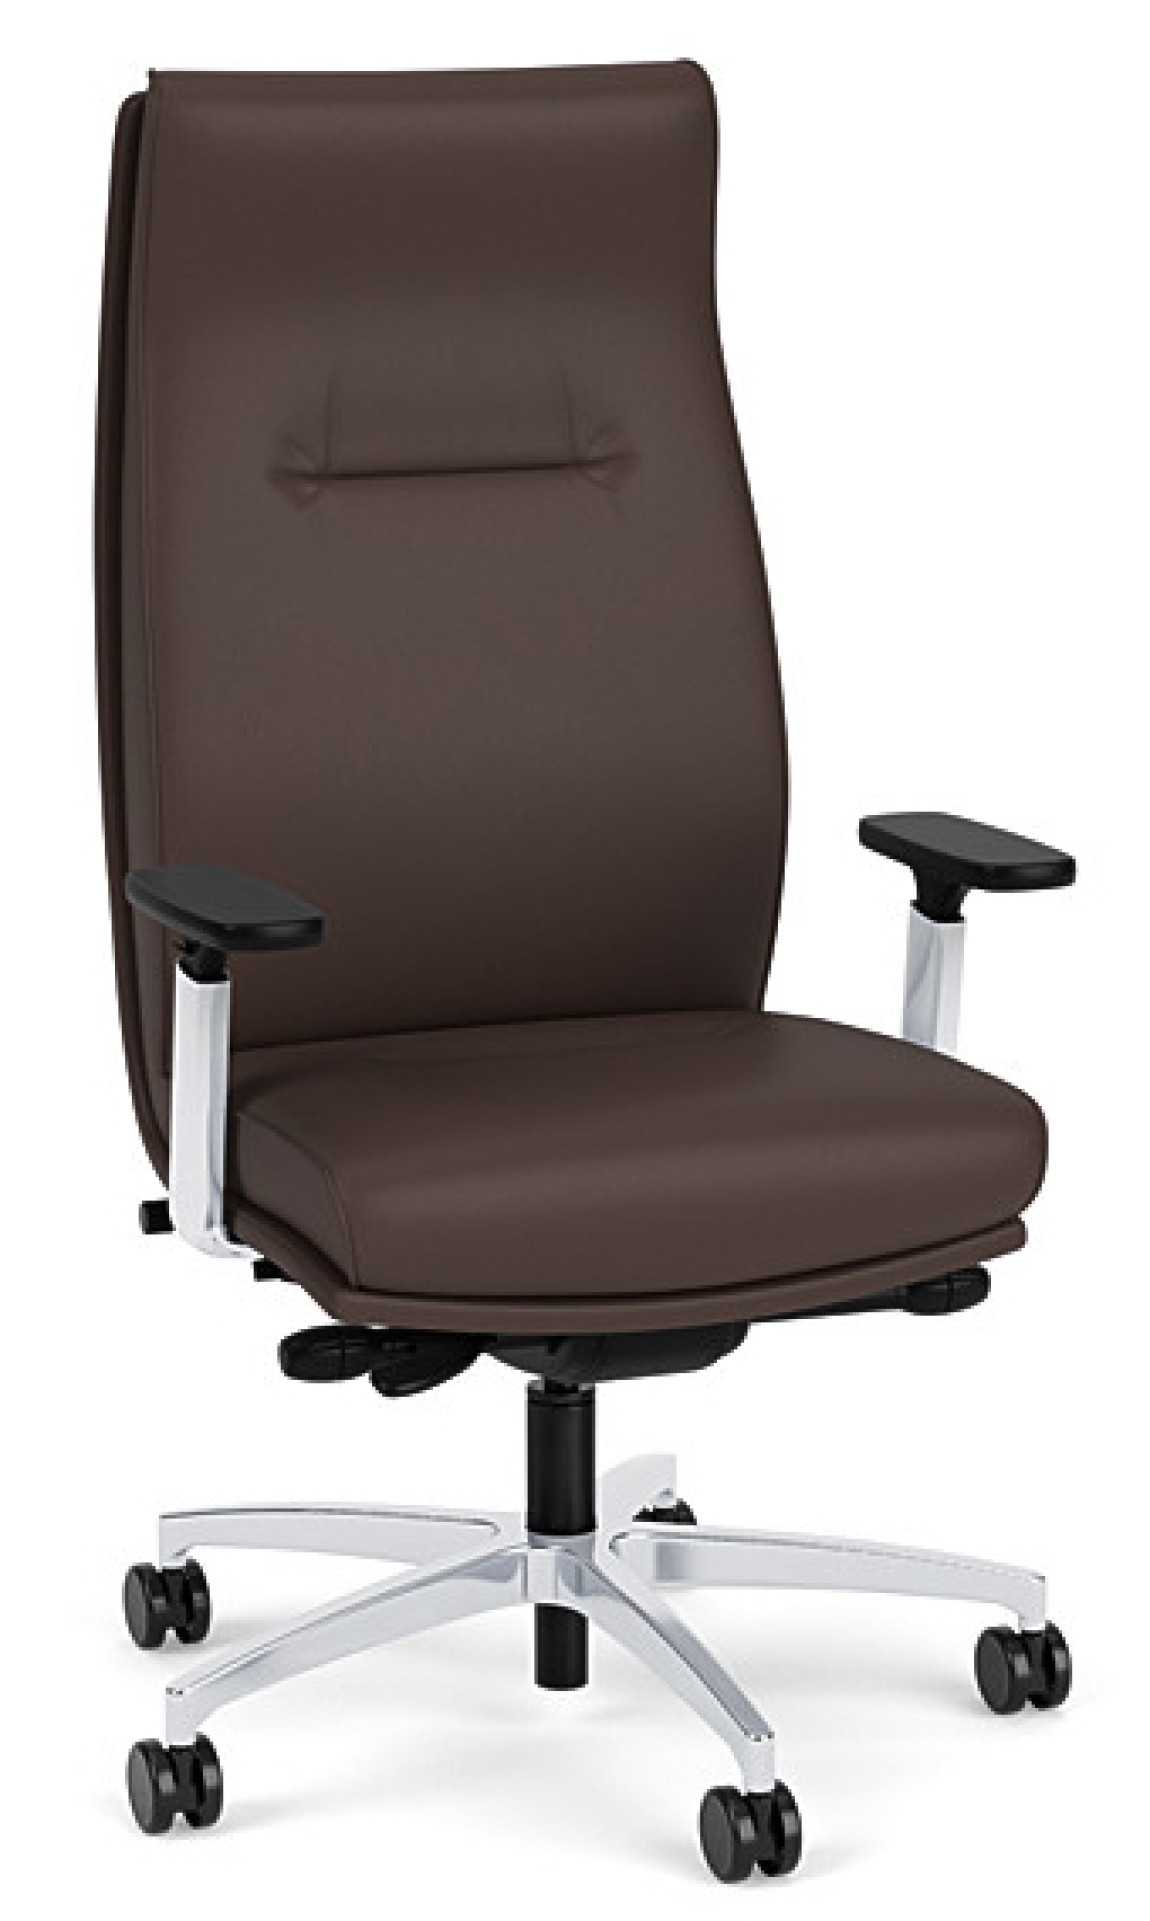 https://www.madisonliquidators.com/images/p/1150/13560-leather-executive-high-back-chair-with-lumbar-support-1.jpg